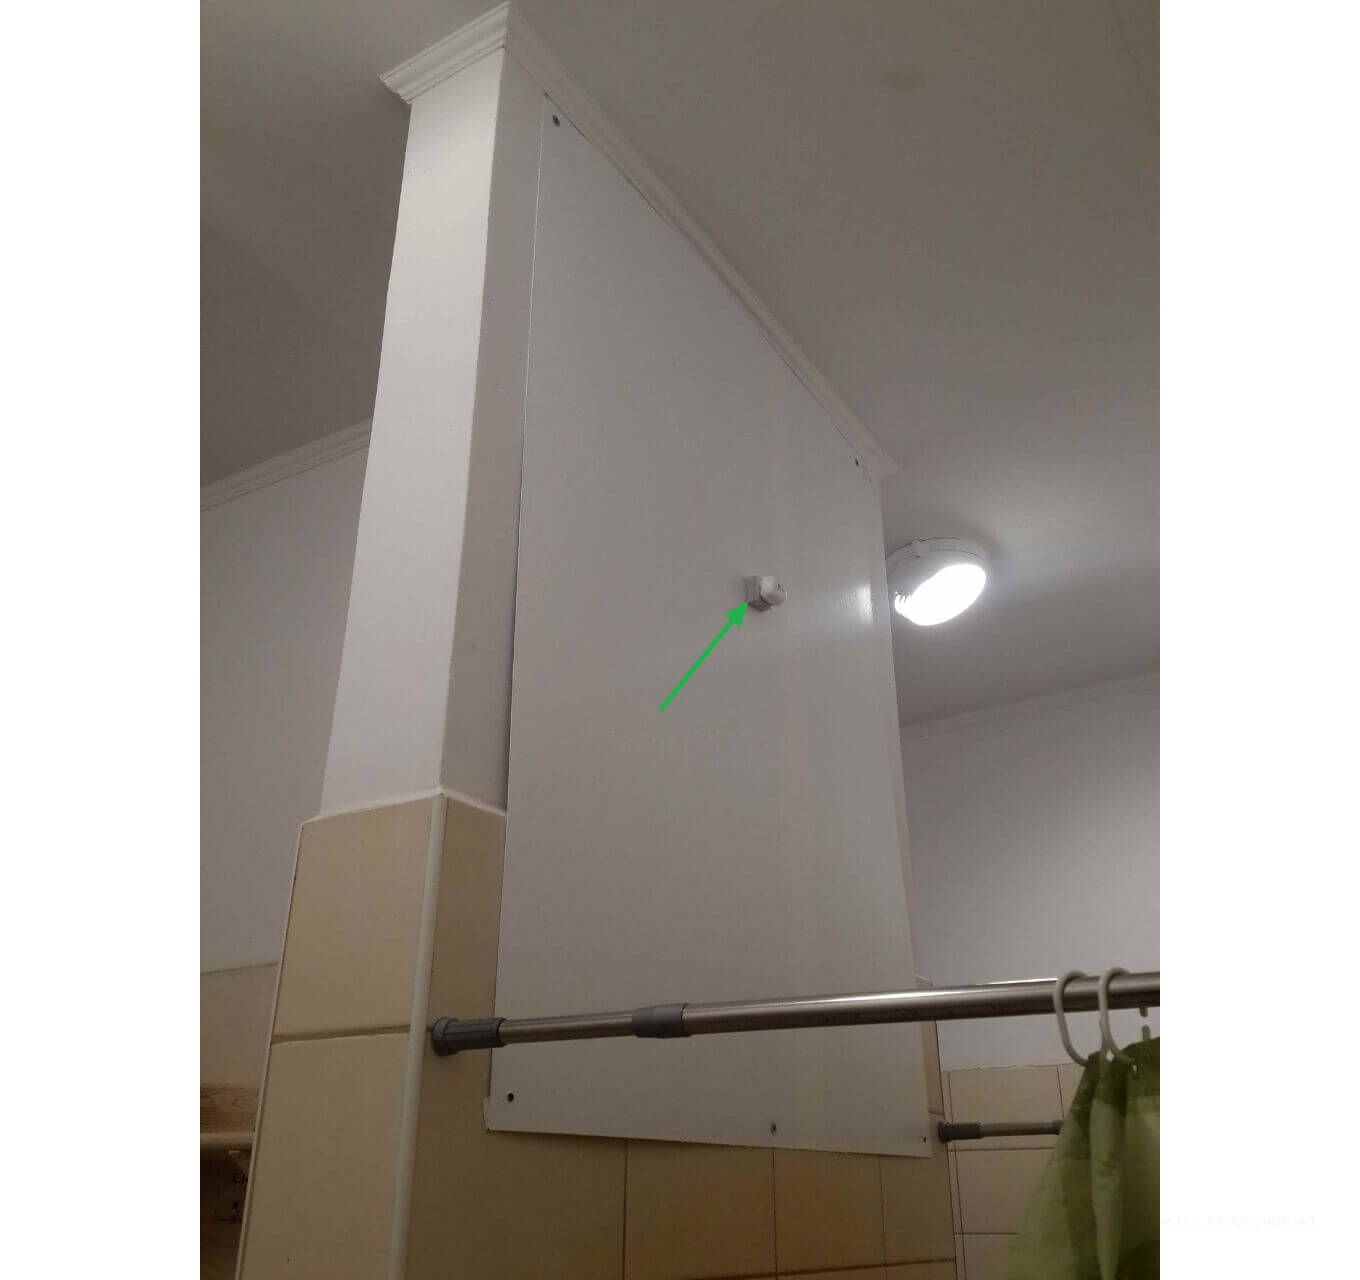 Beacon RF signals interfered with one another in the changing room steel sheet - Agribusiness Staff Hygiene Compliance Monitoring_ Challenges and Solutions - Lemberg Solutions.jpg